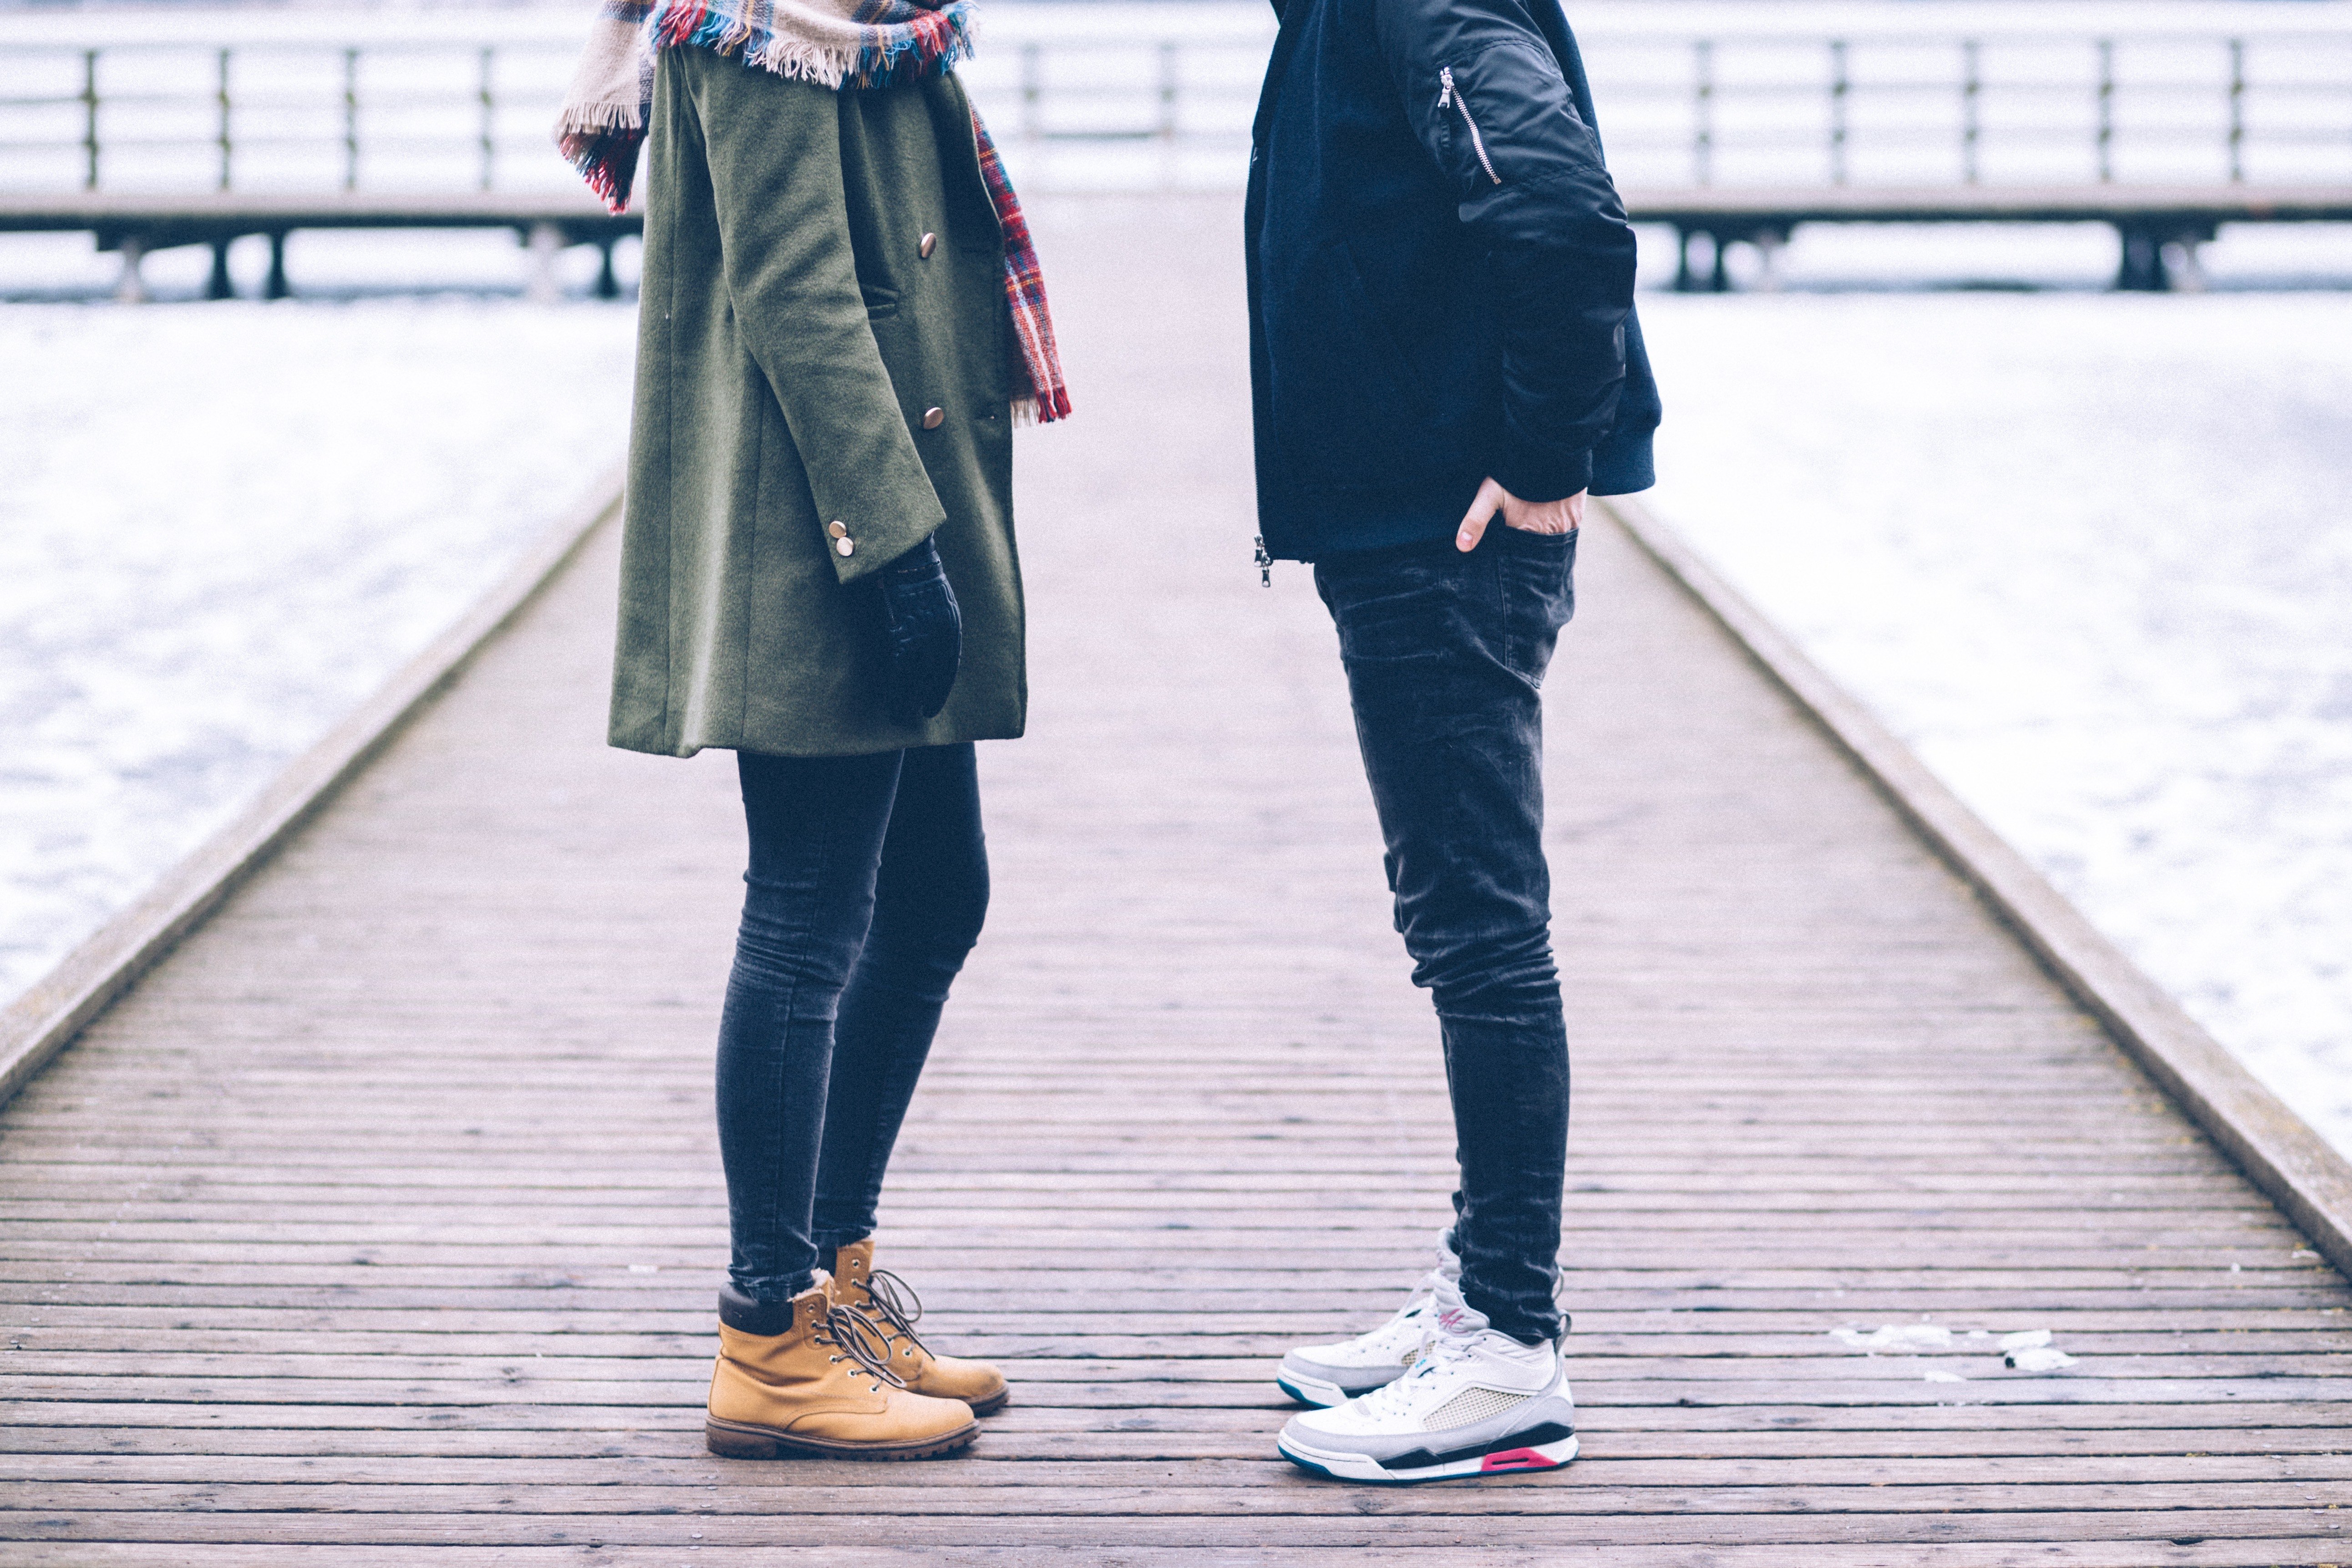 11 WARNING Signs Of Unhealthy Relationships You Need to Be Aware Of